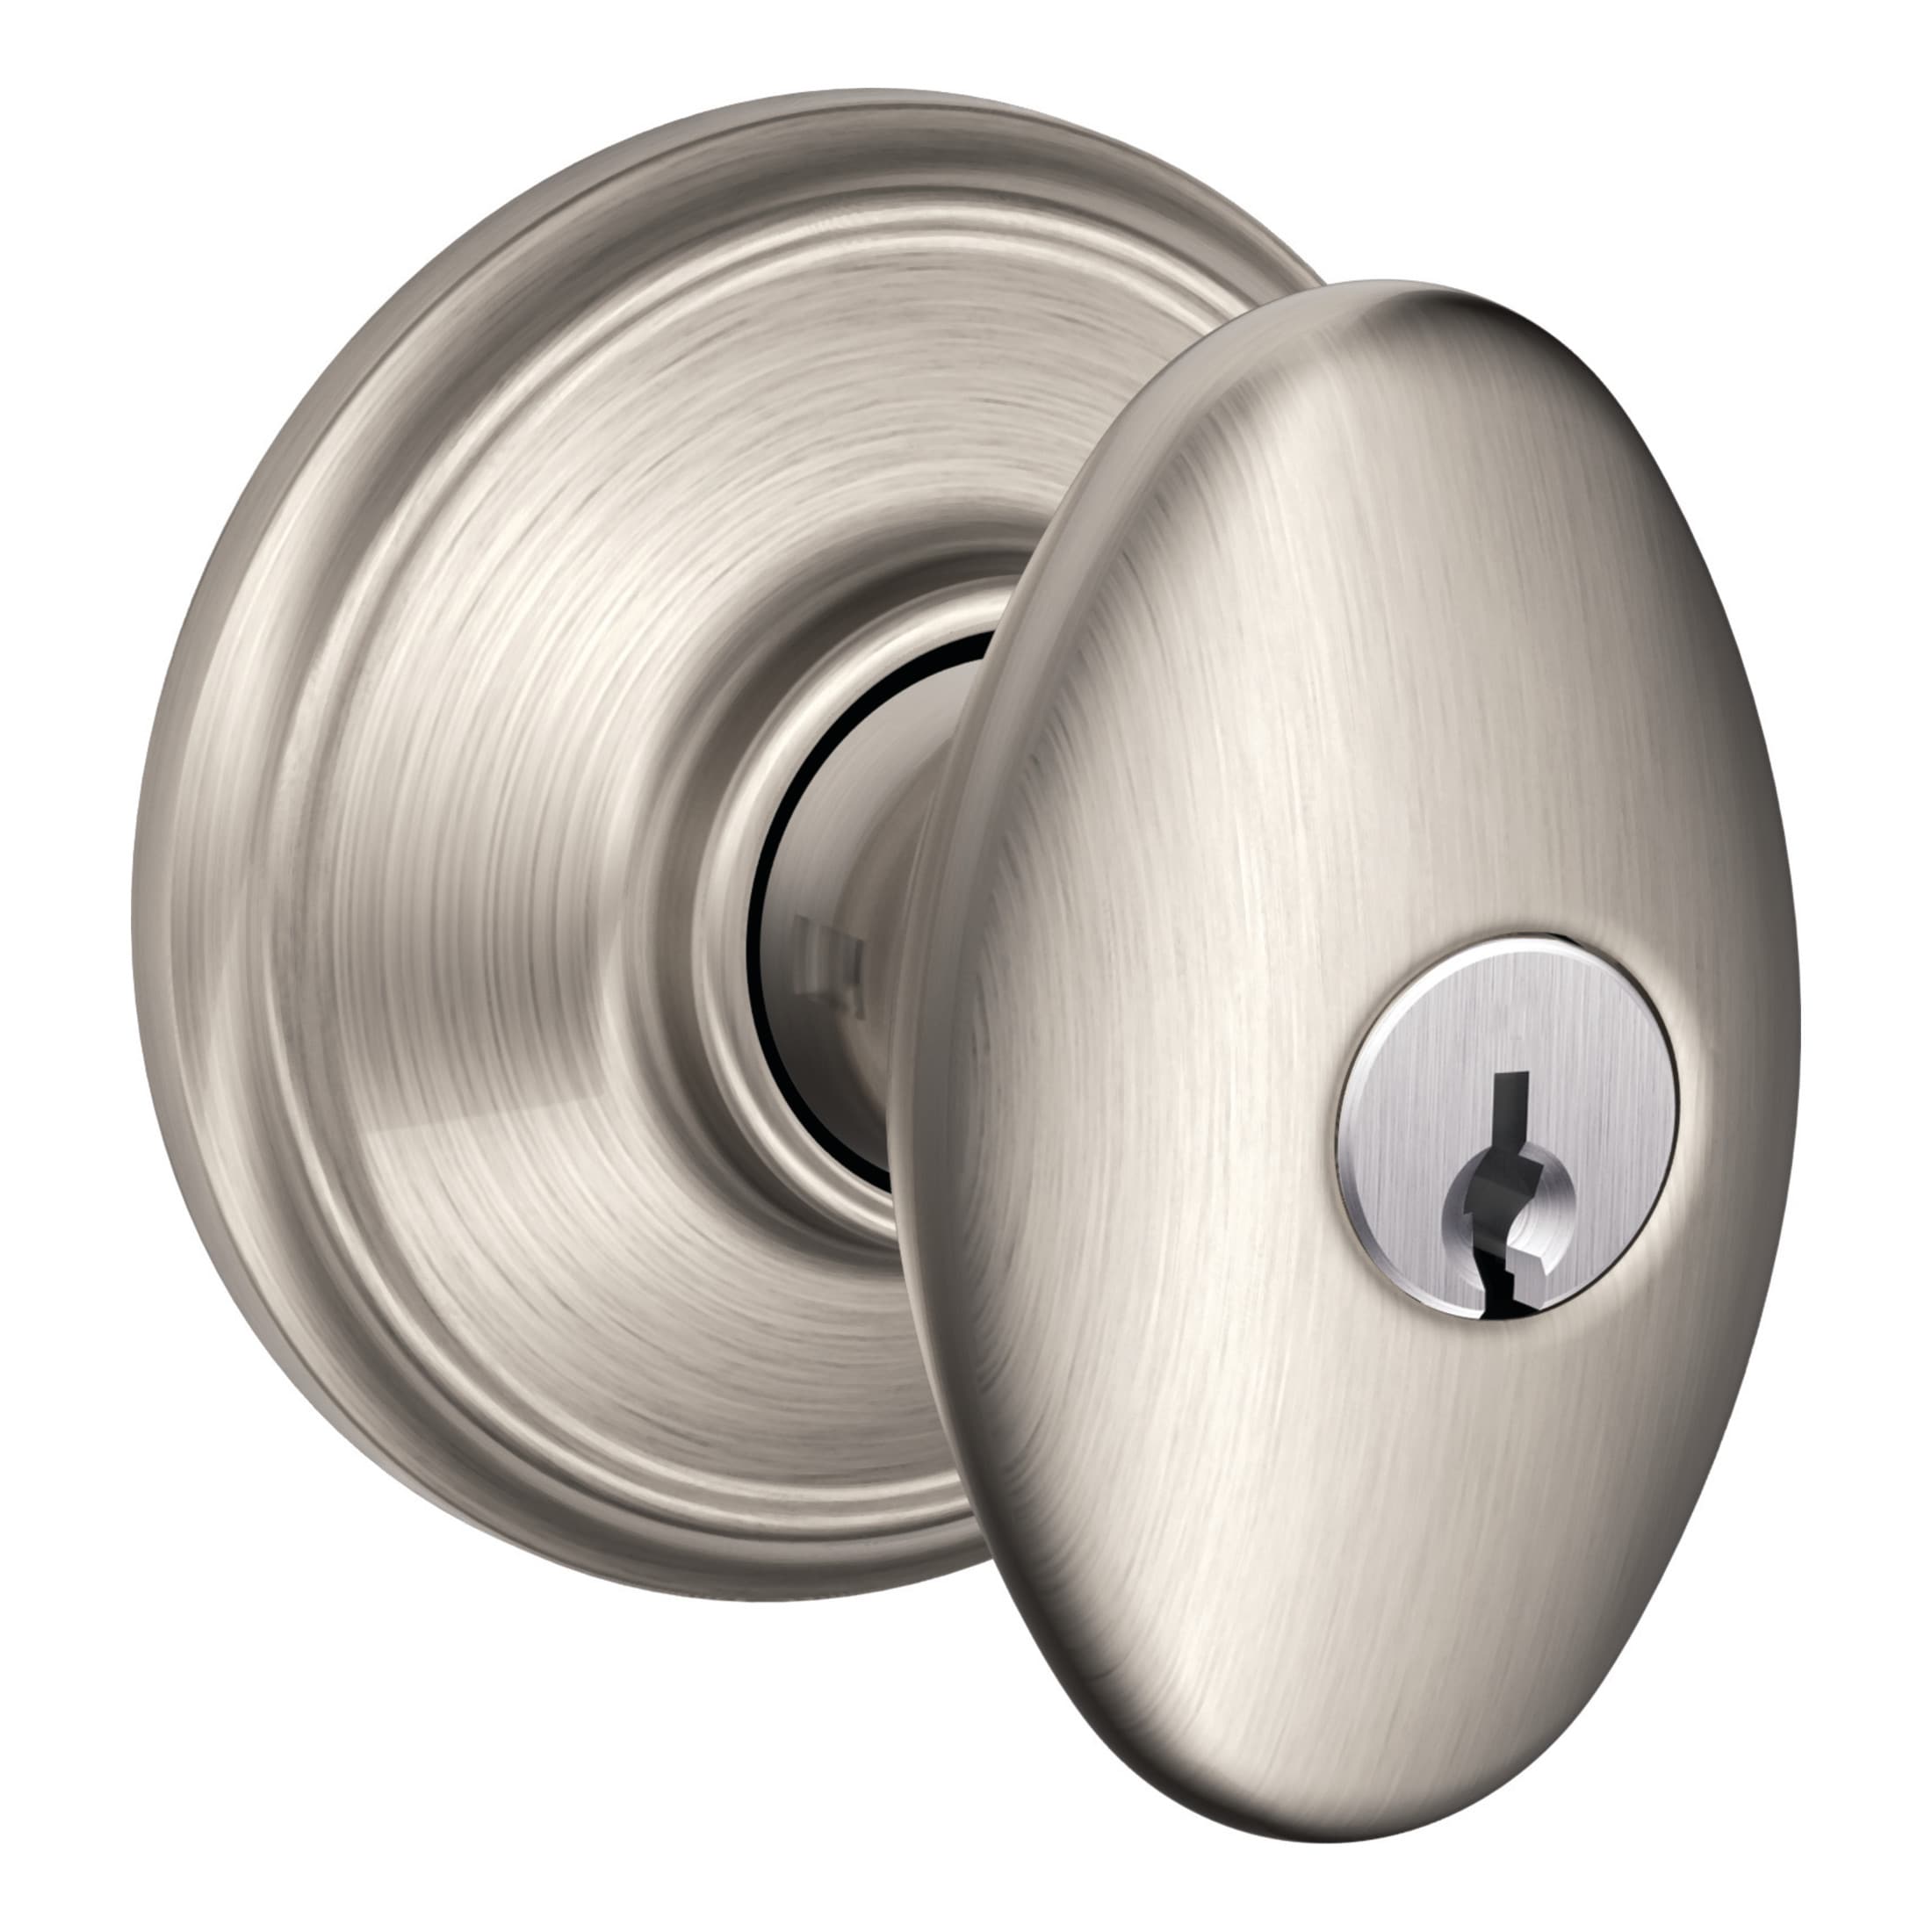 Schlage Bowery Satin Nickel Entry Knobs Grade 1 1-3/8 in. - Total